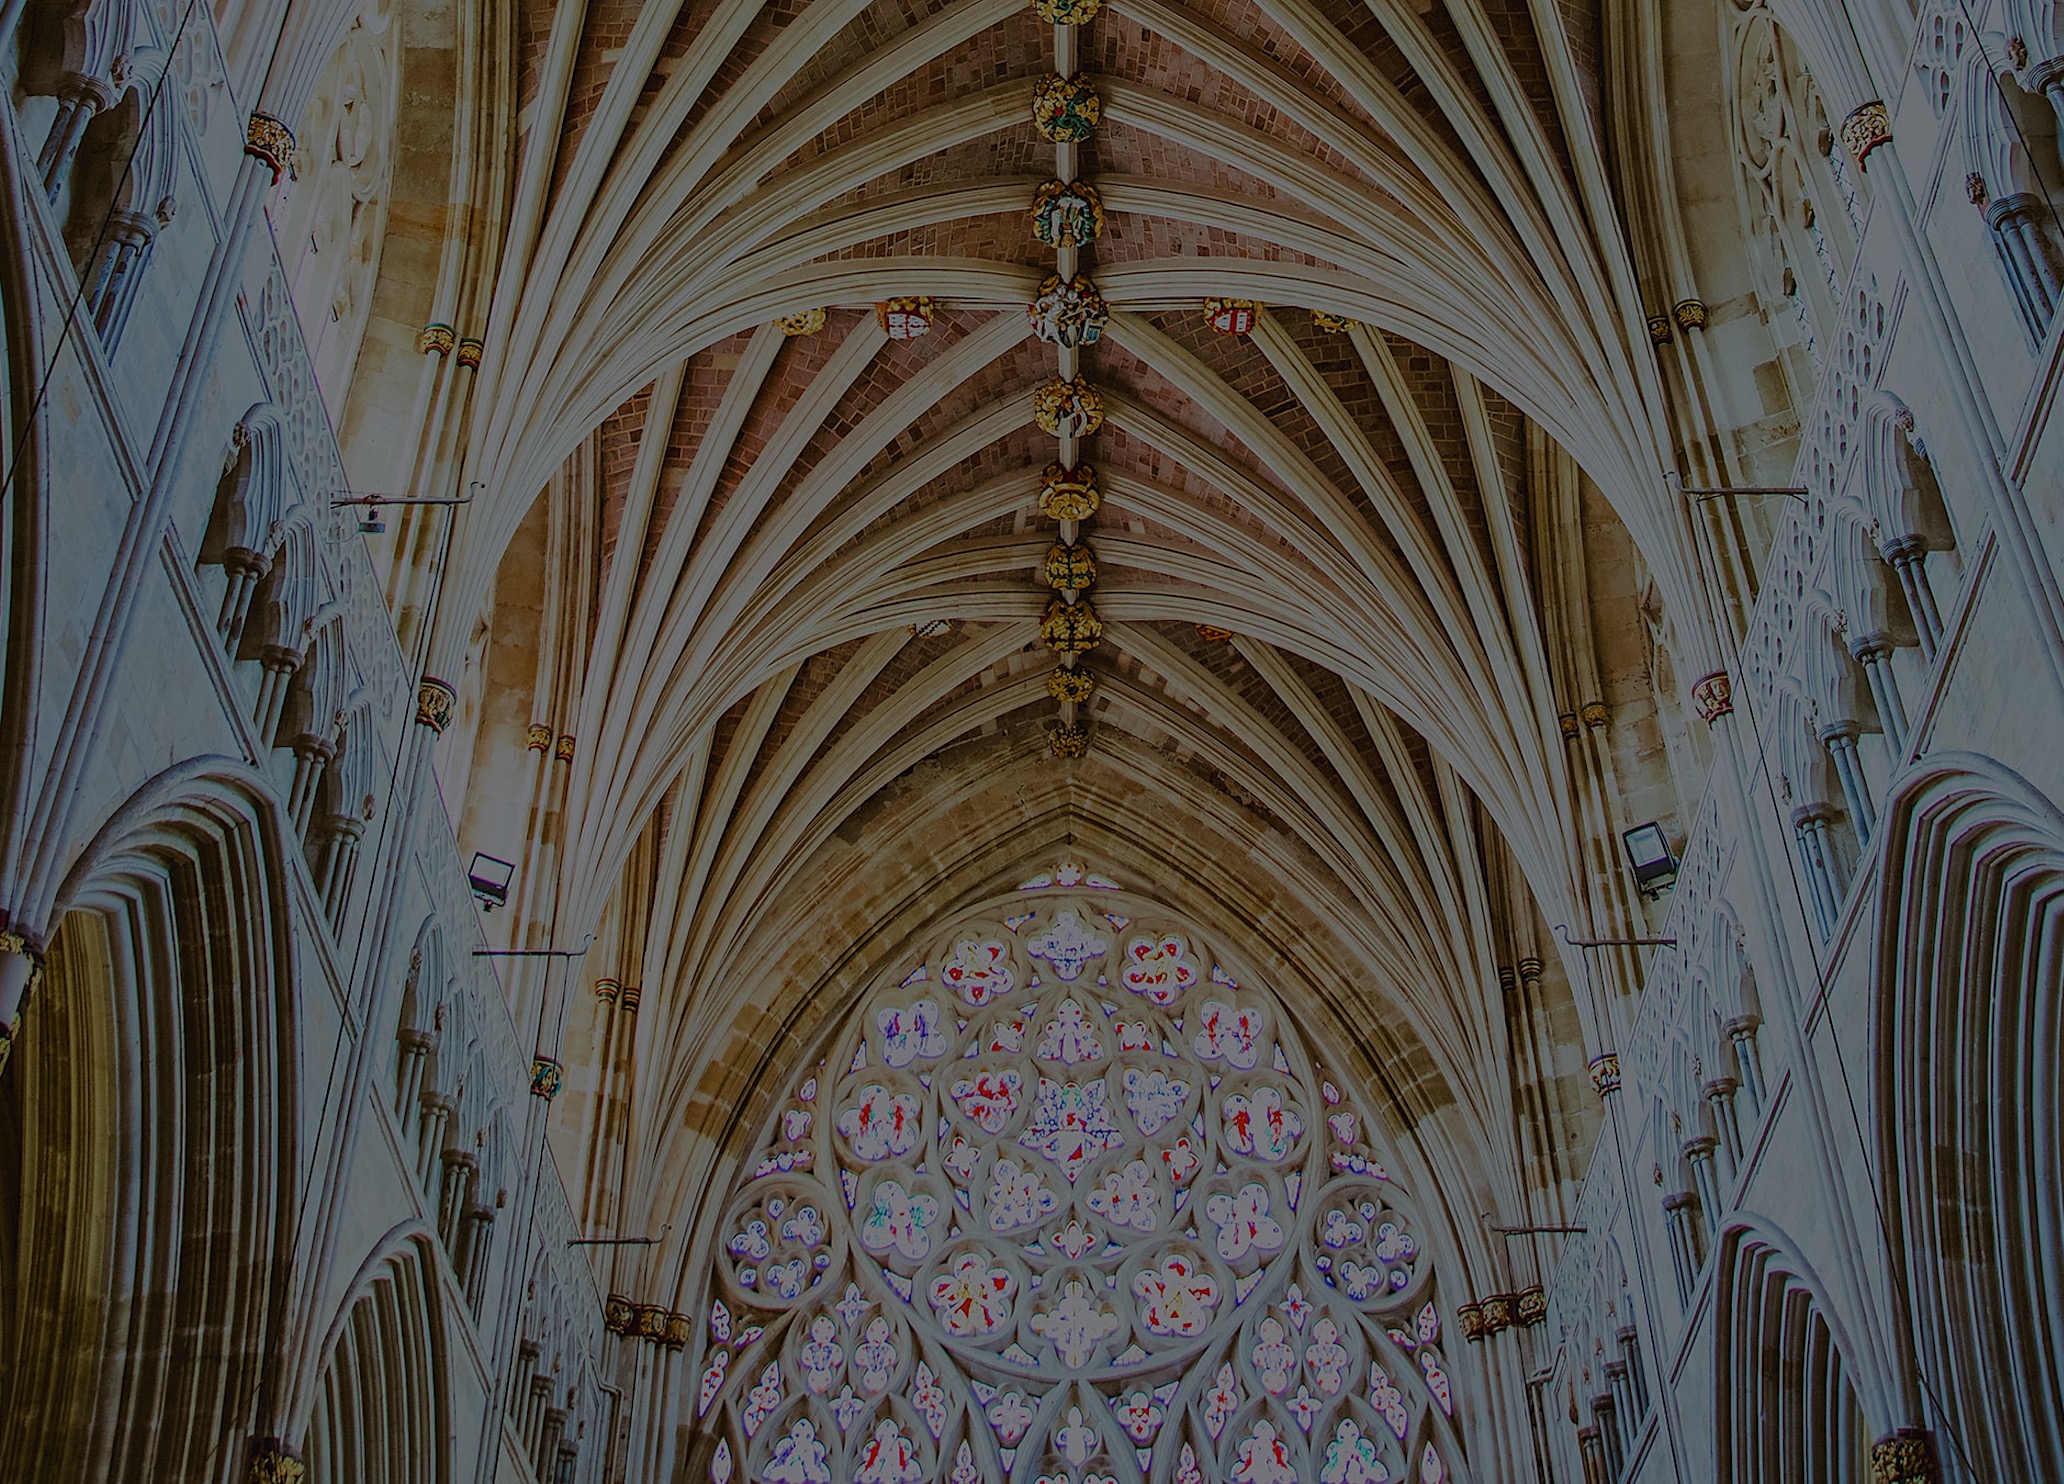 Exeter Cathedral Ceiling - Always Look Up